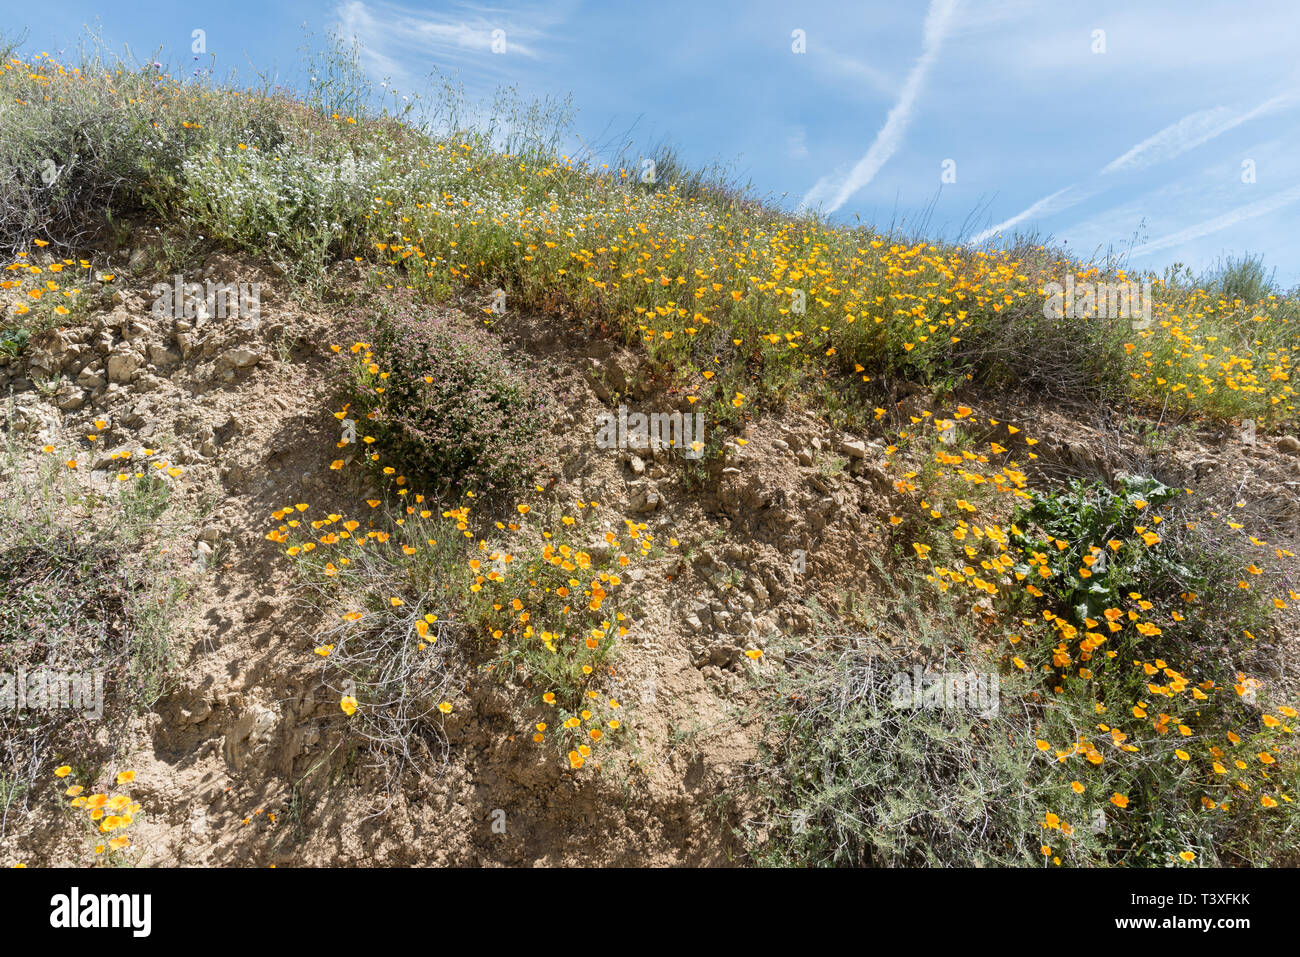 Beautiful wild flowers - a part of the superbloom phenomena in the Walker Canyon mountain range near Lake Elsinore, Southern California Stock Photo